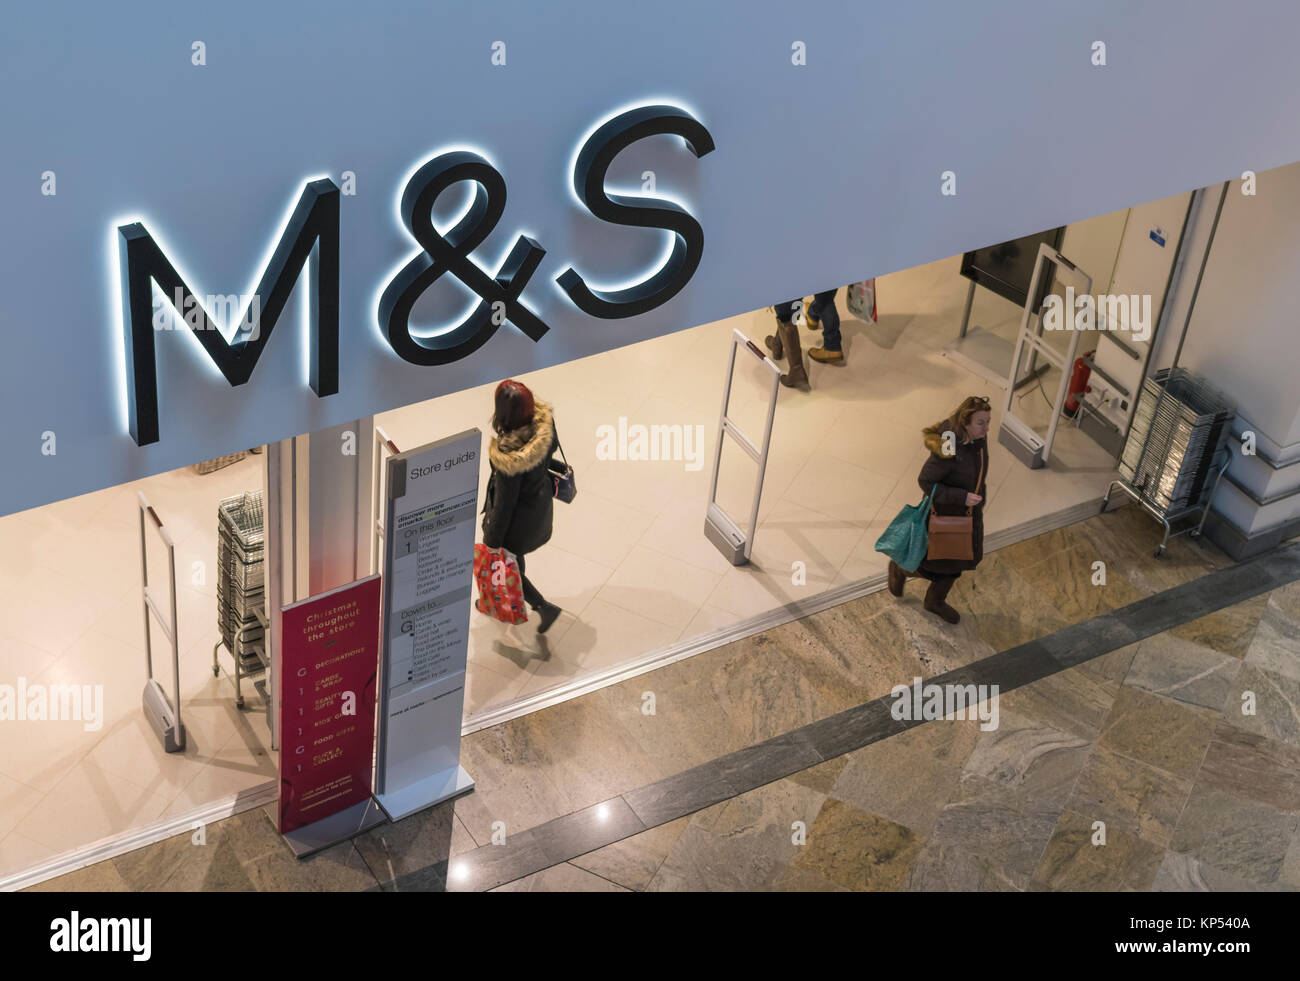 M&S (Marks and Spencer) shop front in the West Quay Shopping Centre in Southampton, England, UK. Stock Photo